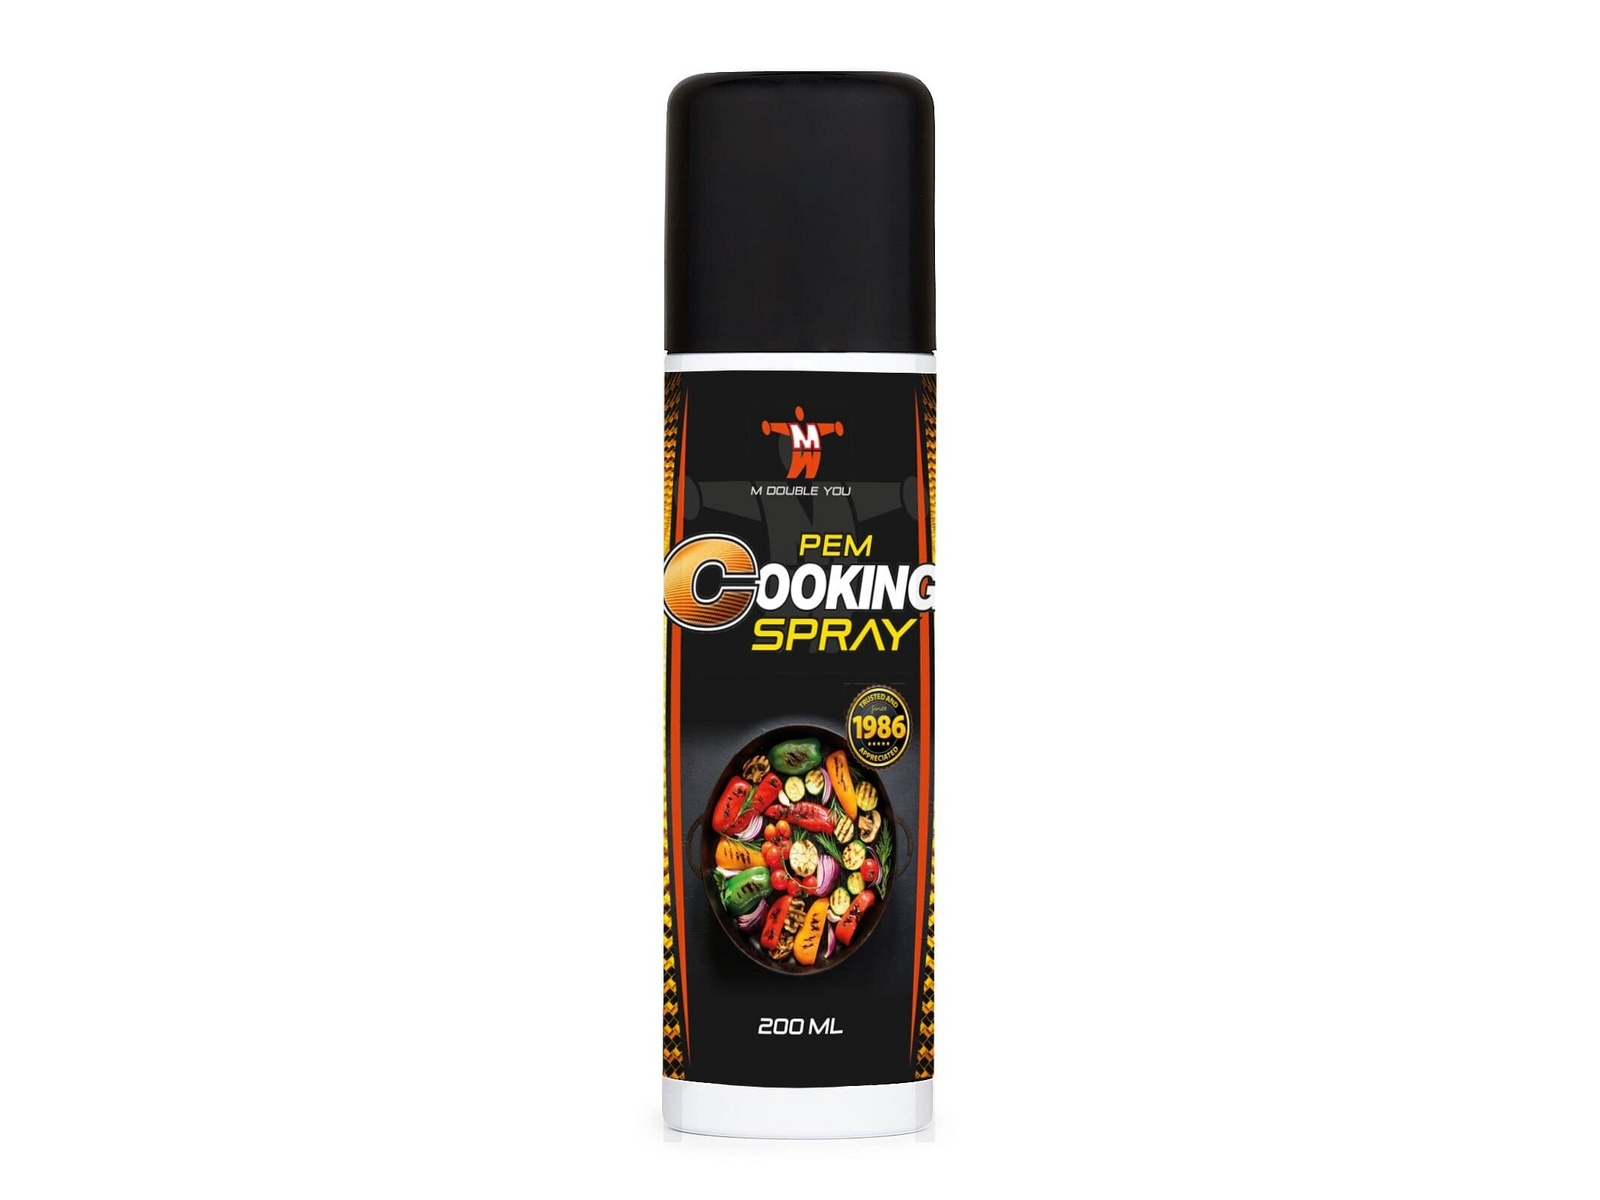 PEM Cooking spray (200 ml) - M DOUBLE YOU